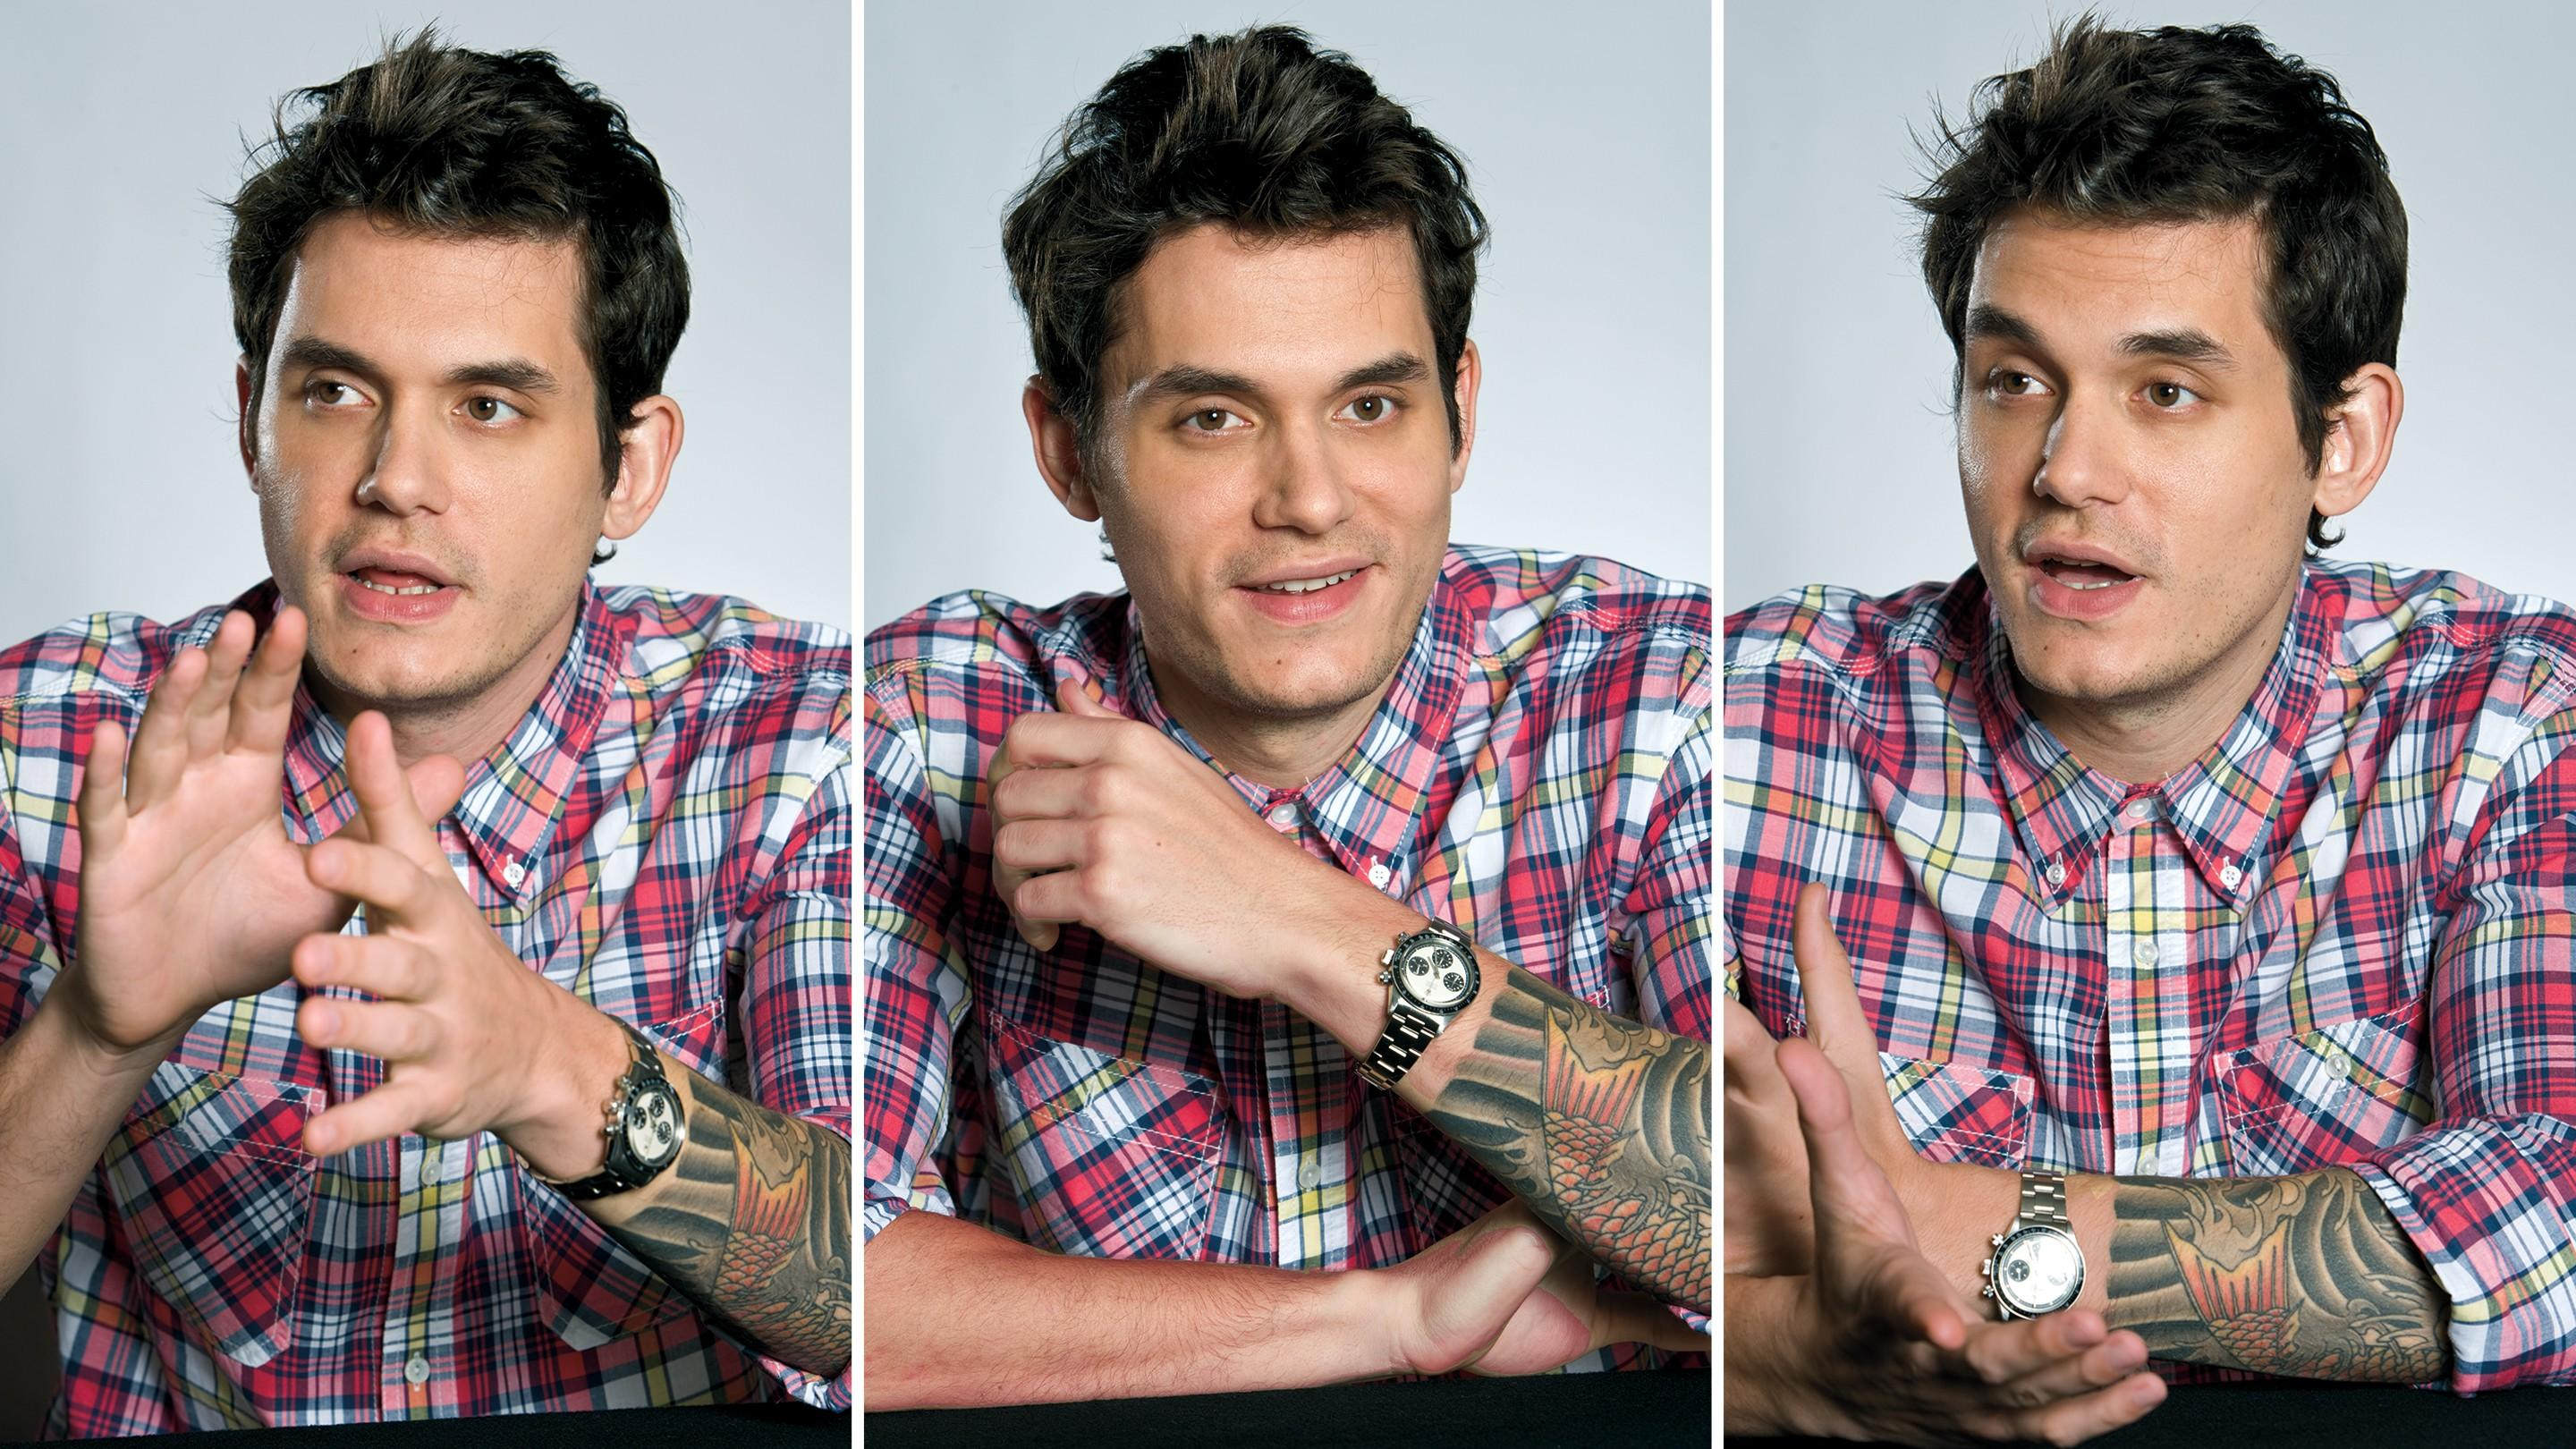 John Mayer on Jessica Simspon, Jennifer Aniston, and Why the Best Sex Happens Alone pic